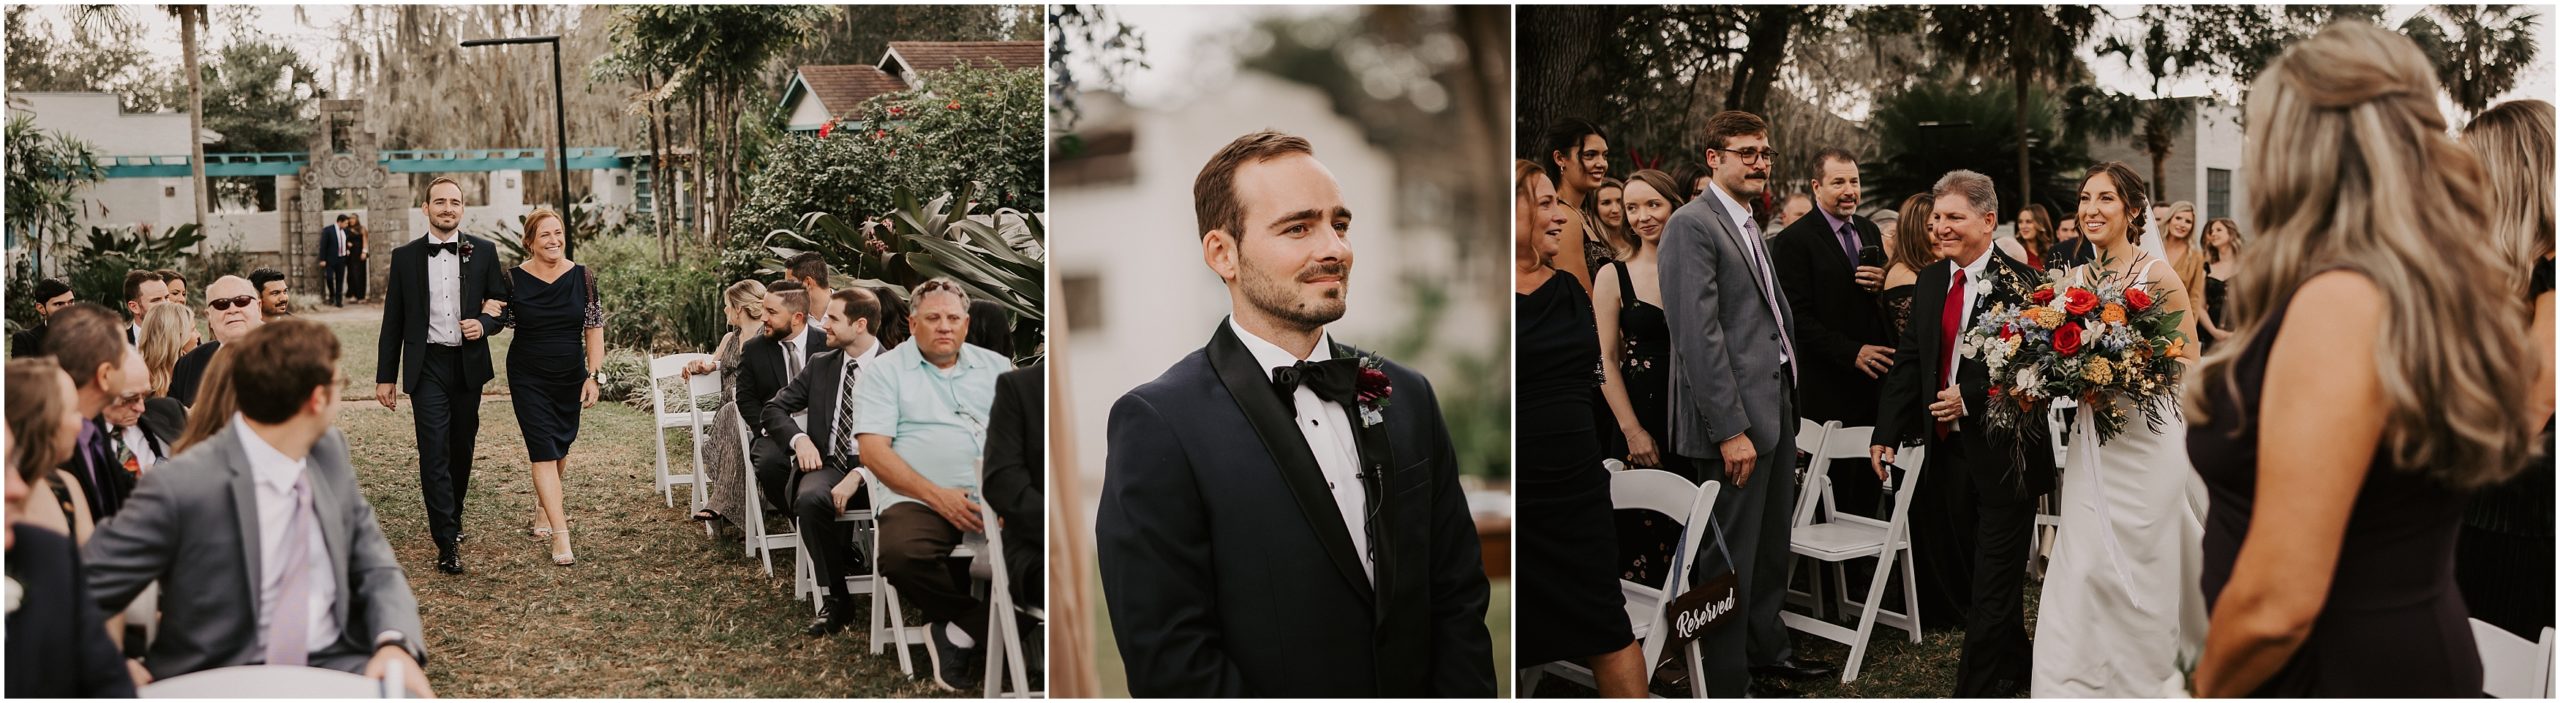 Charles' face filled with joy as Alyssa walked down the aisle